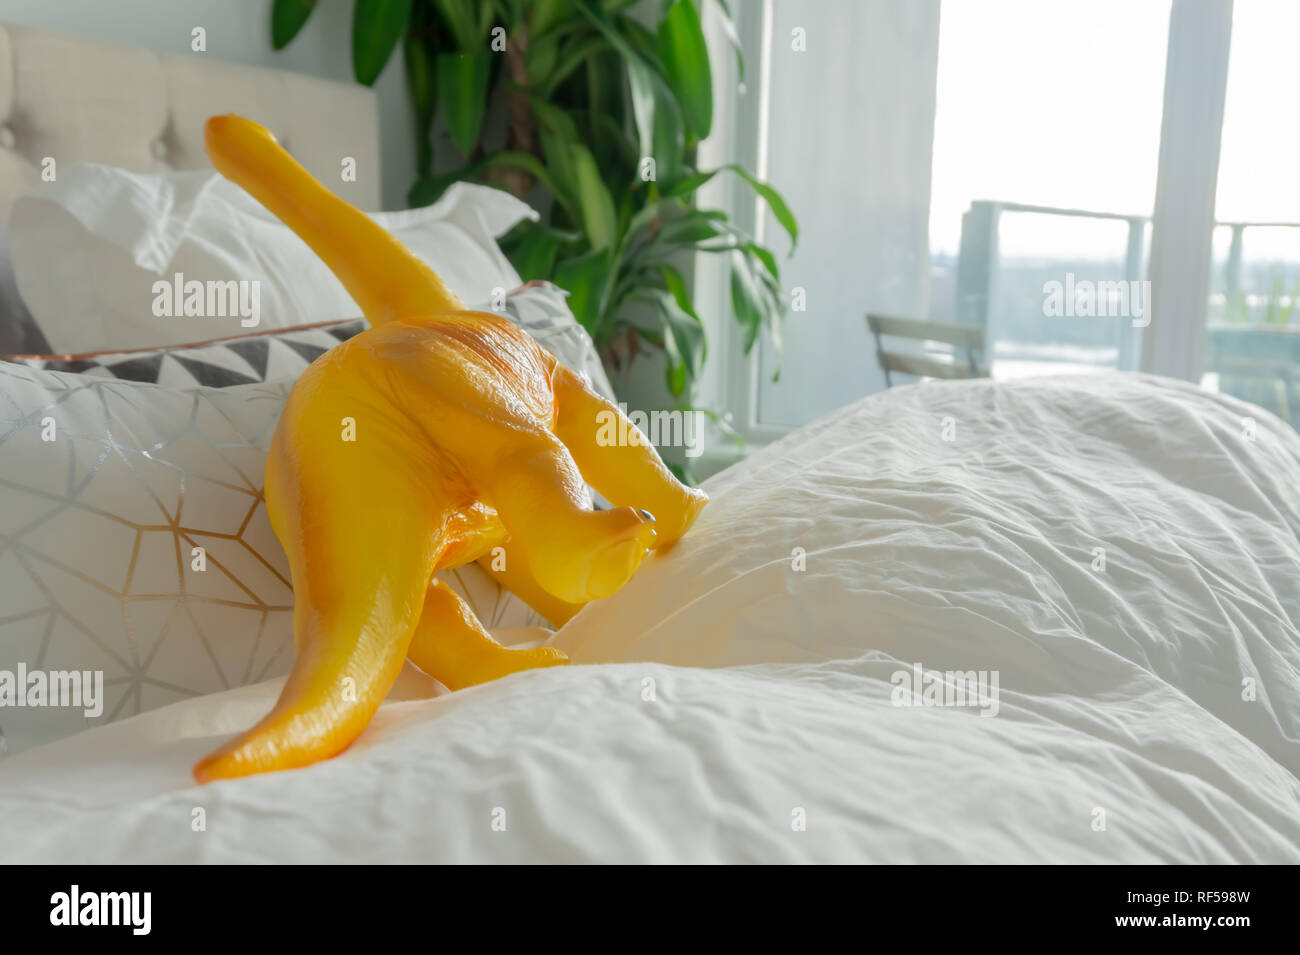 Yellow toy dinosaur in parent bed, depicting parenting lifestyle and a real home. Stock Photo